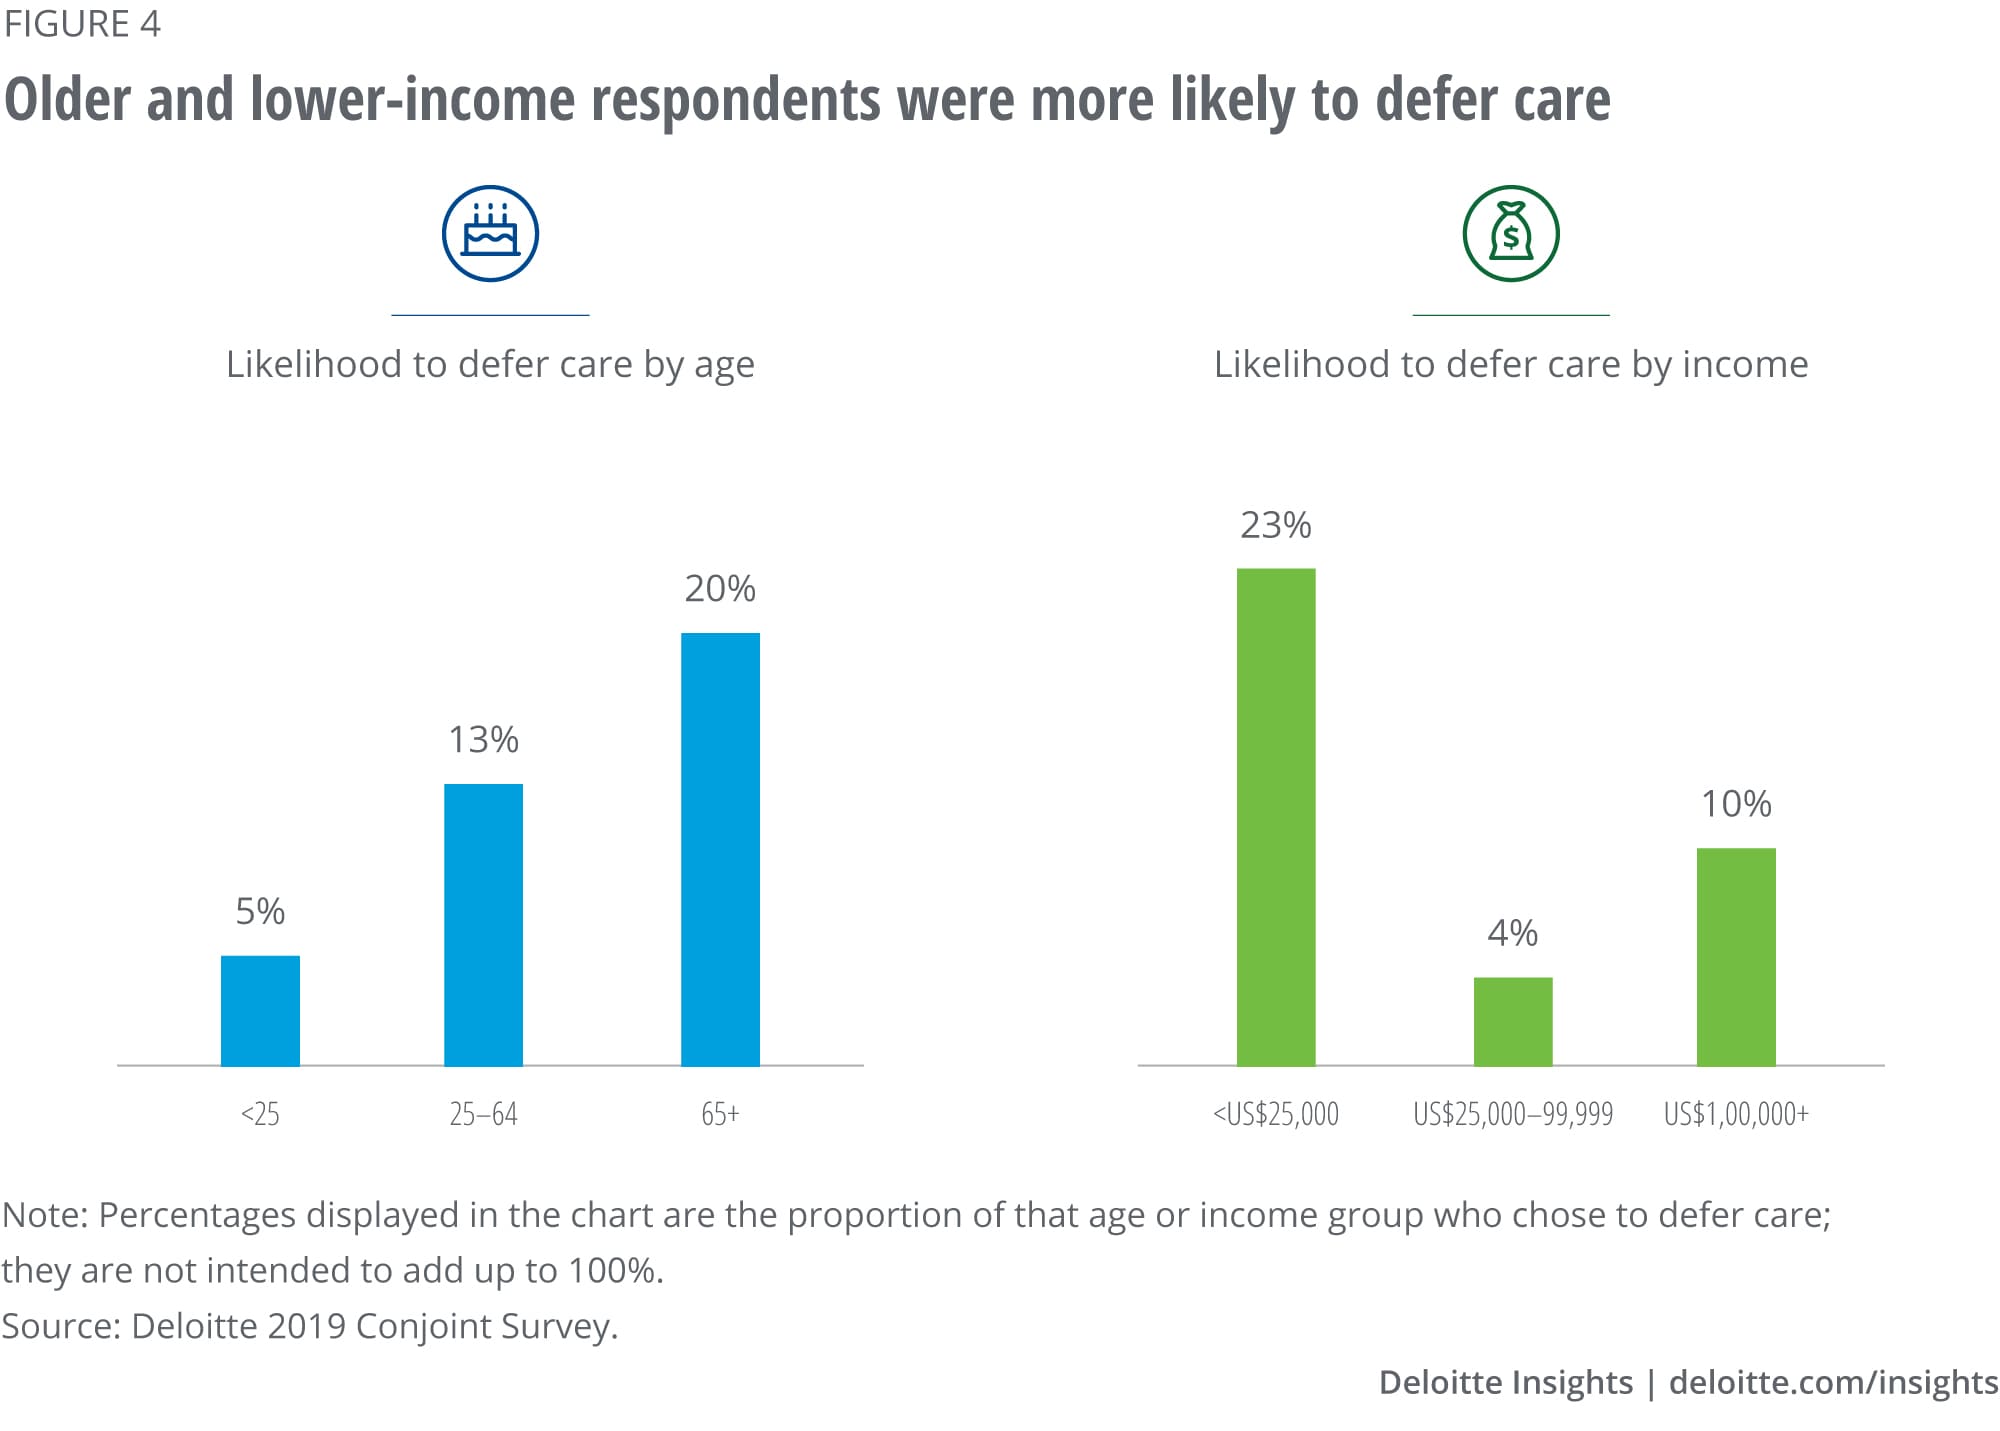 Older and lower-income respondents were more likely to defer care